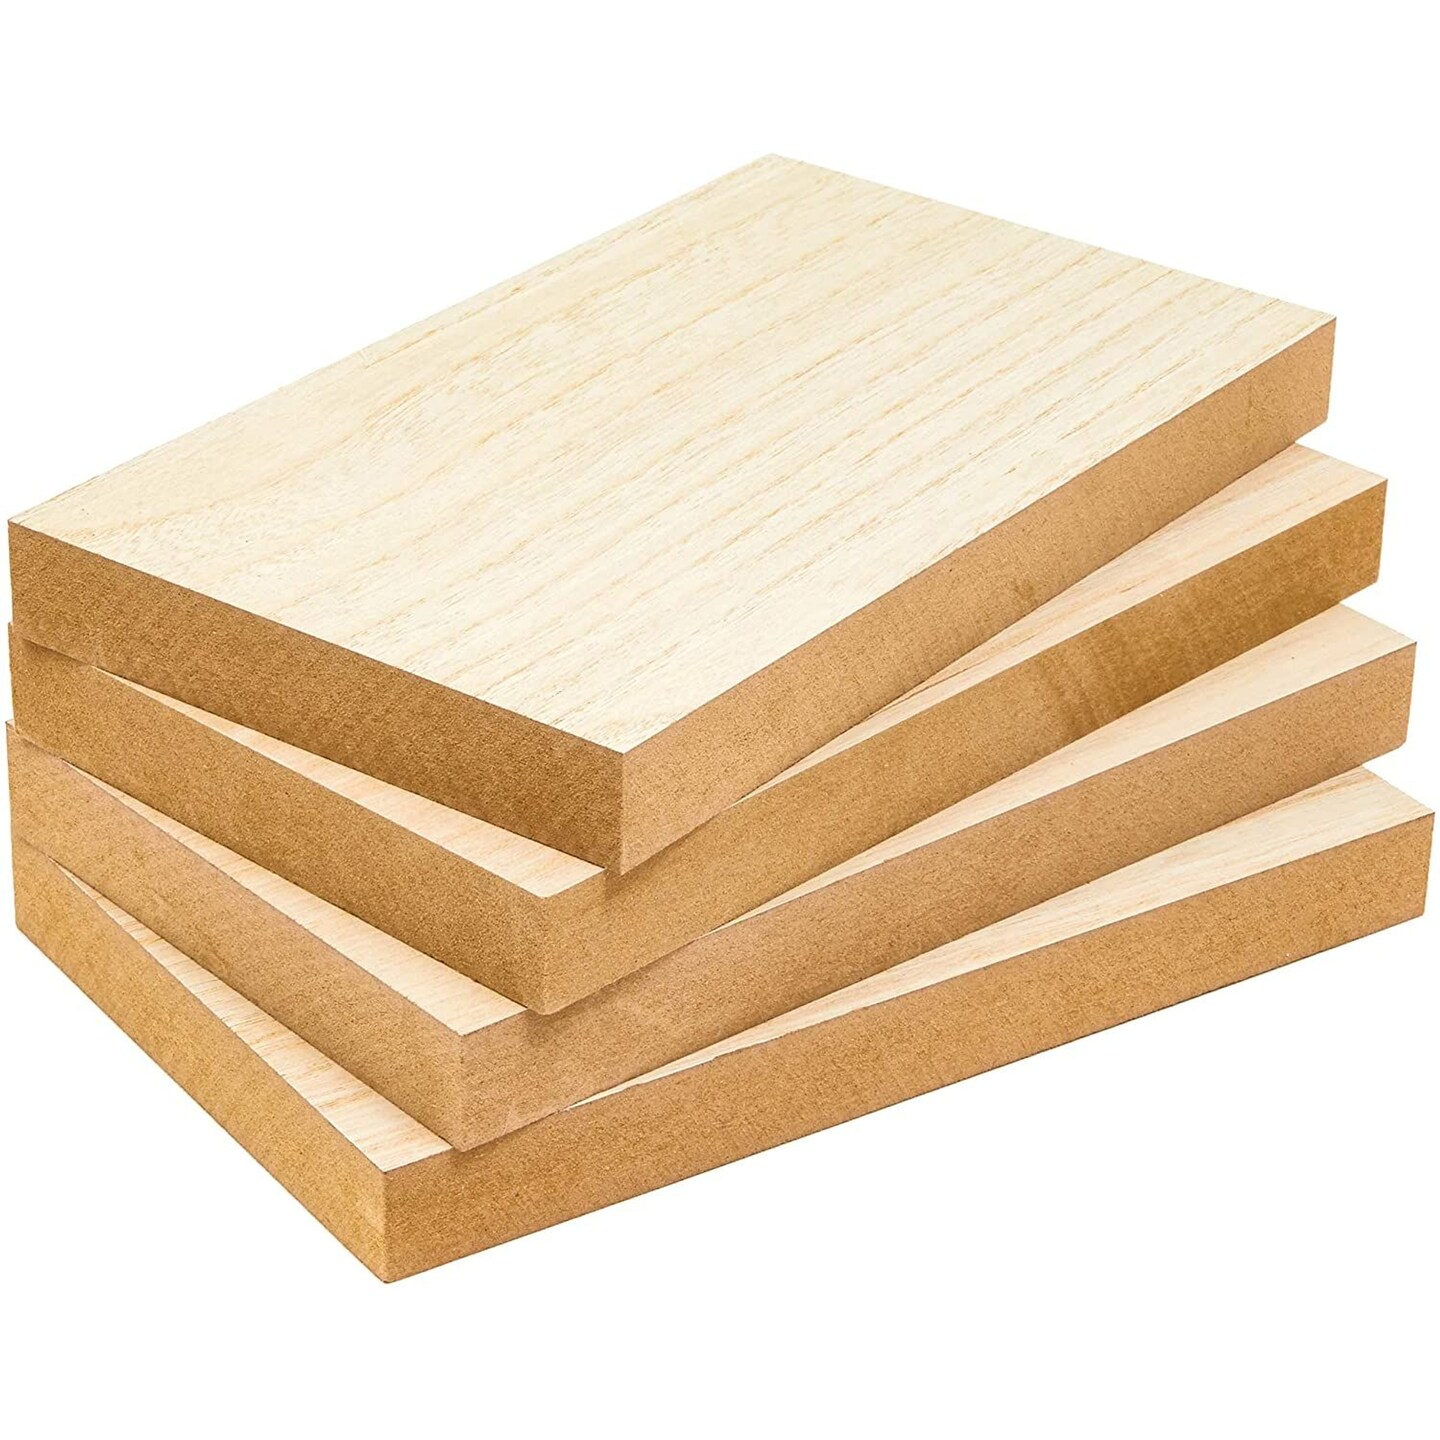 4 Pack 6 x 10 Inch Unfinished Wood Blocks, Smooth Surface for Crafts, DIY  Projects (1 Inch Thick)